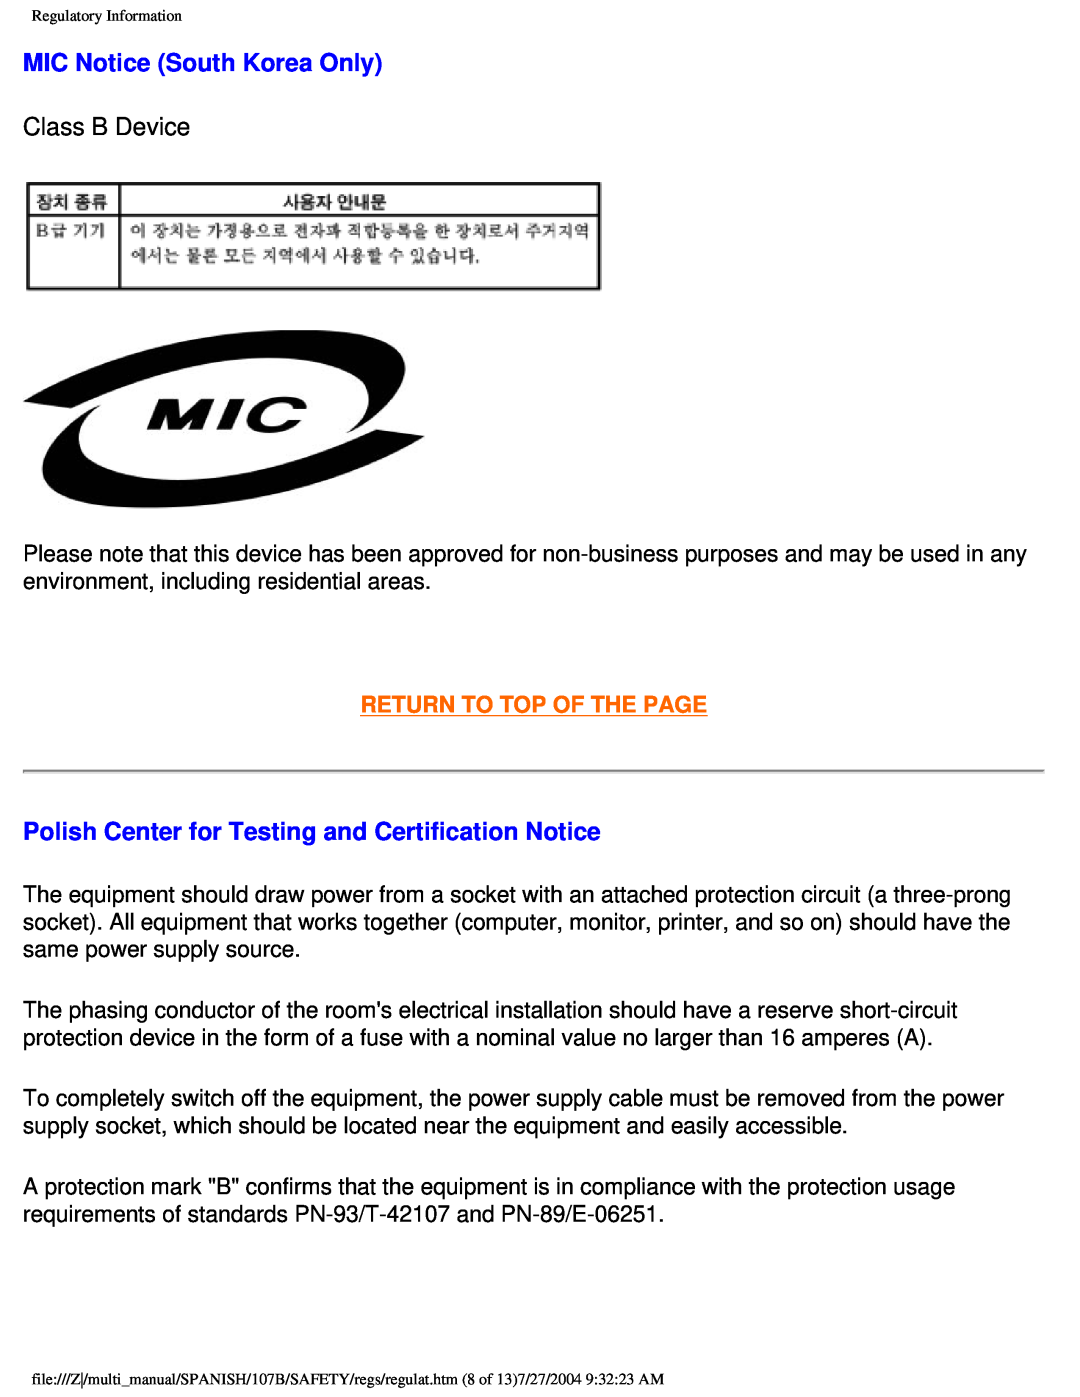 Philips 107B user manual MIC Notice South Korea Only, Class B Device, Polish Center for Testing and Certification Notice 